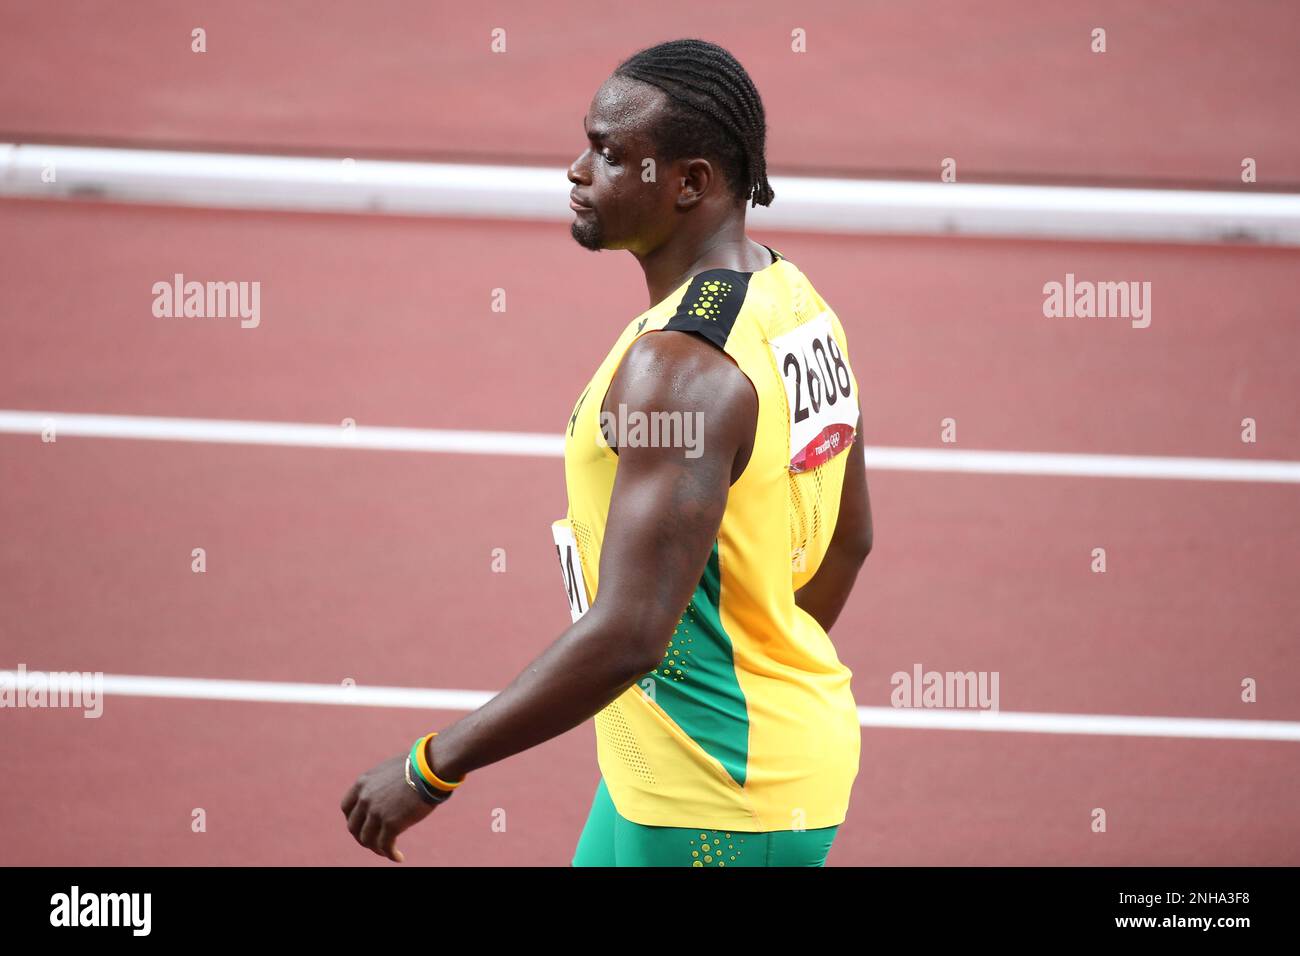 AUG 06, 2021 - Tokyo, Japan: Jevaughn Minzie of Jamaica in the Athletics Men's 4 x 100m Relay Final at the Tokyo 2020 Olympic Games (Photo: Mickael Chavet/RX) Stock Photo